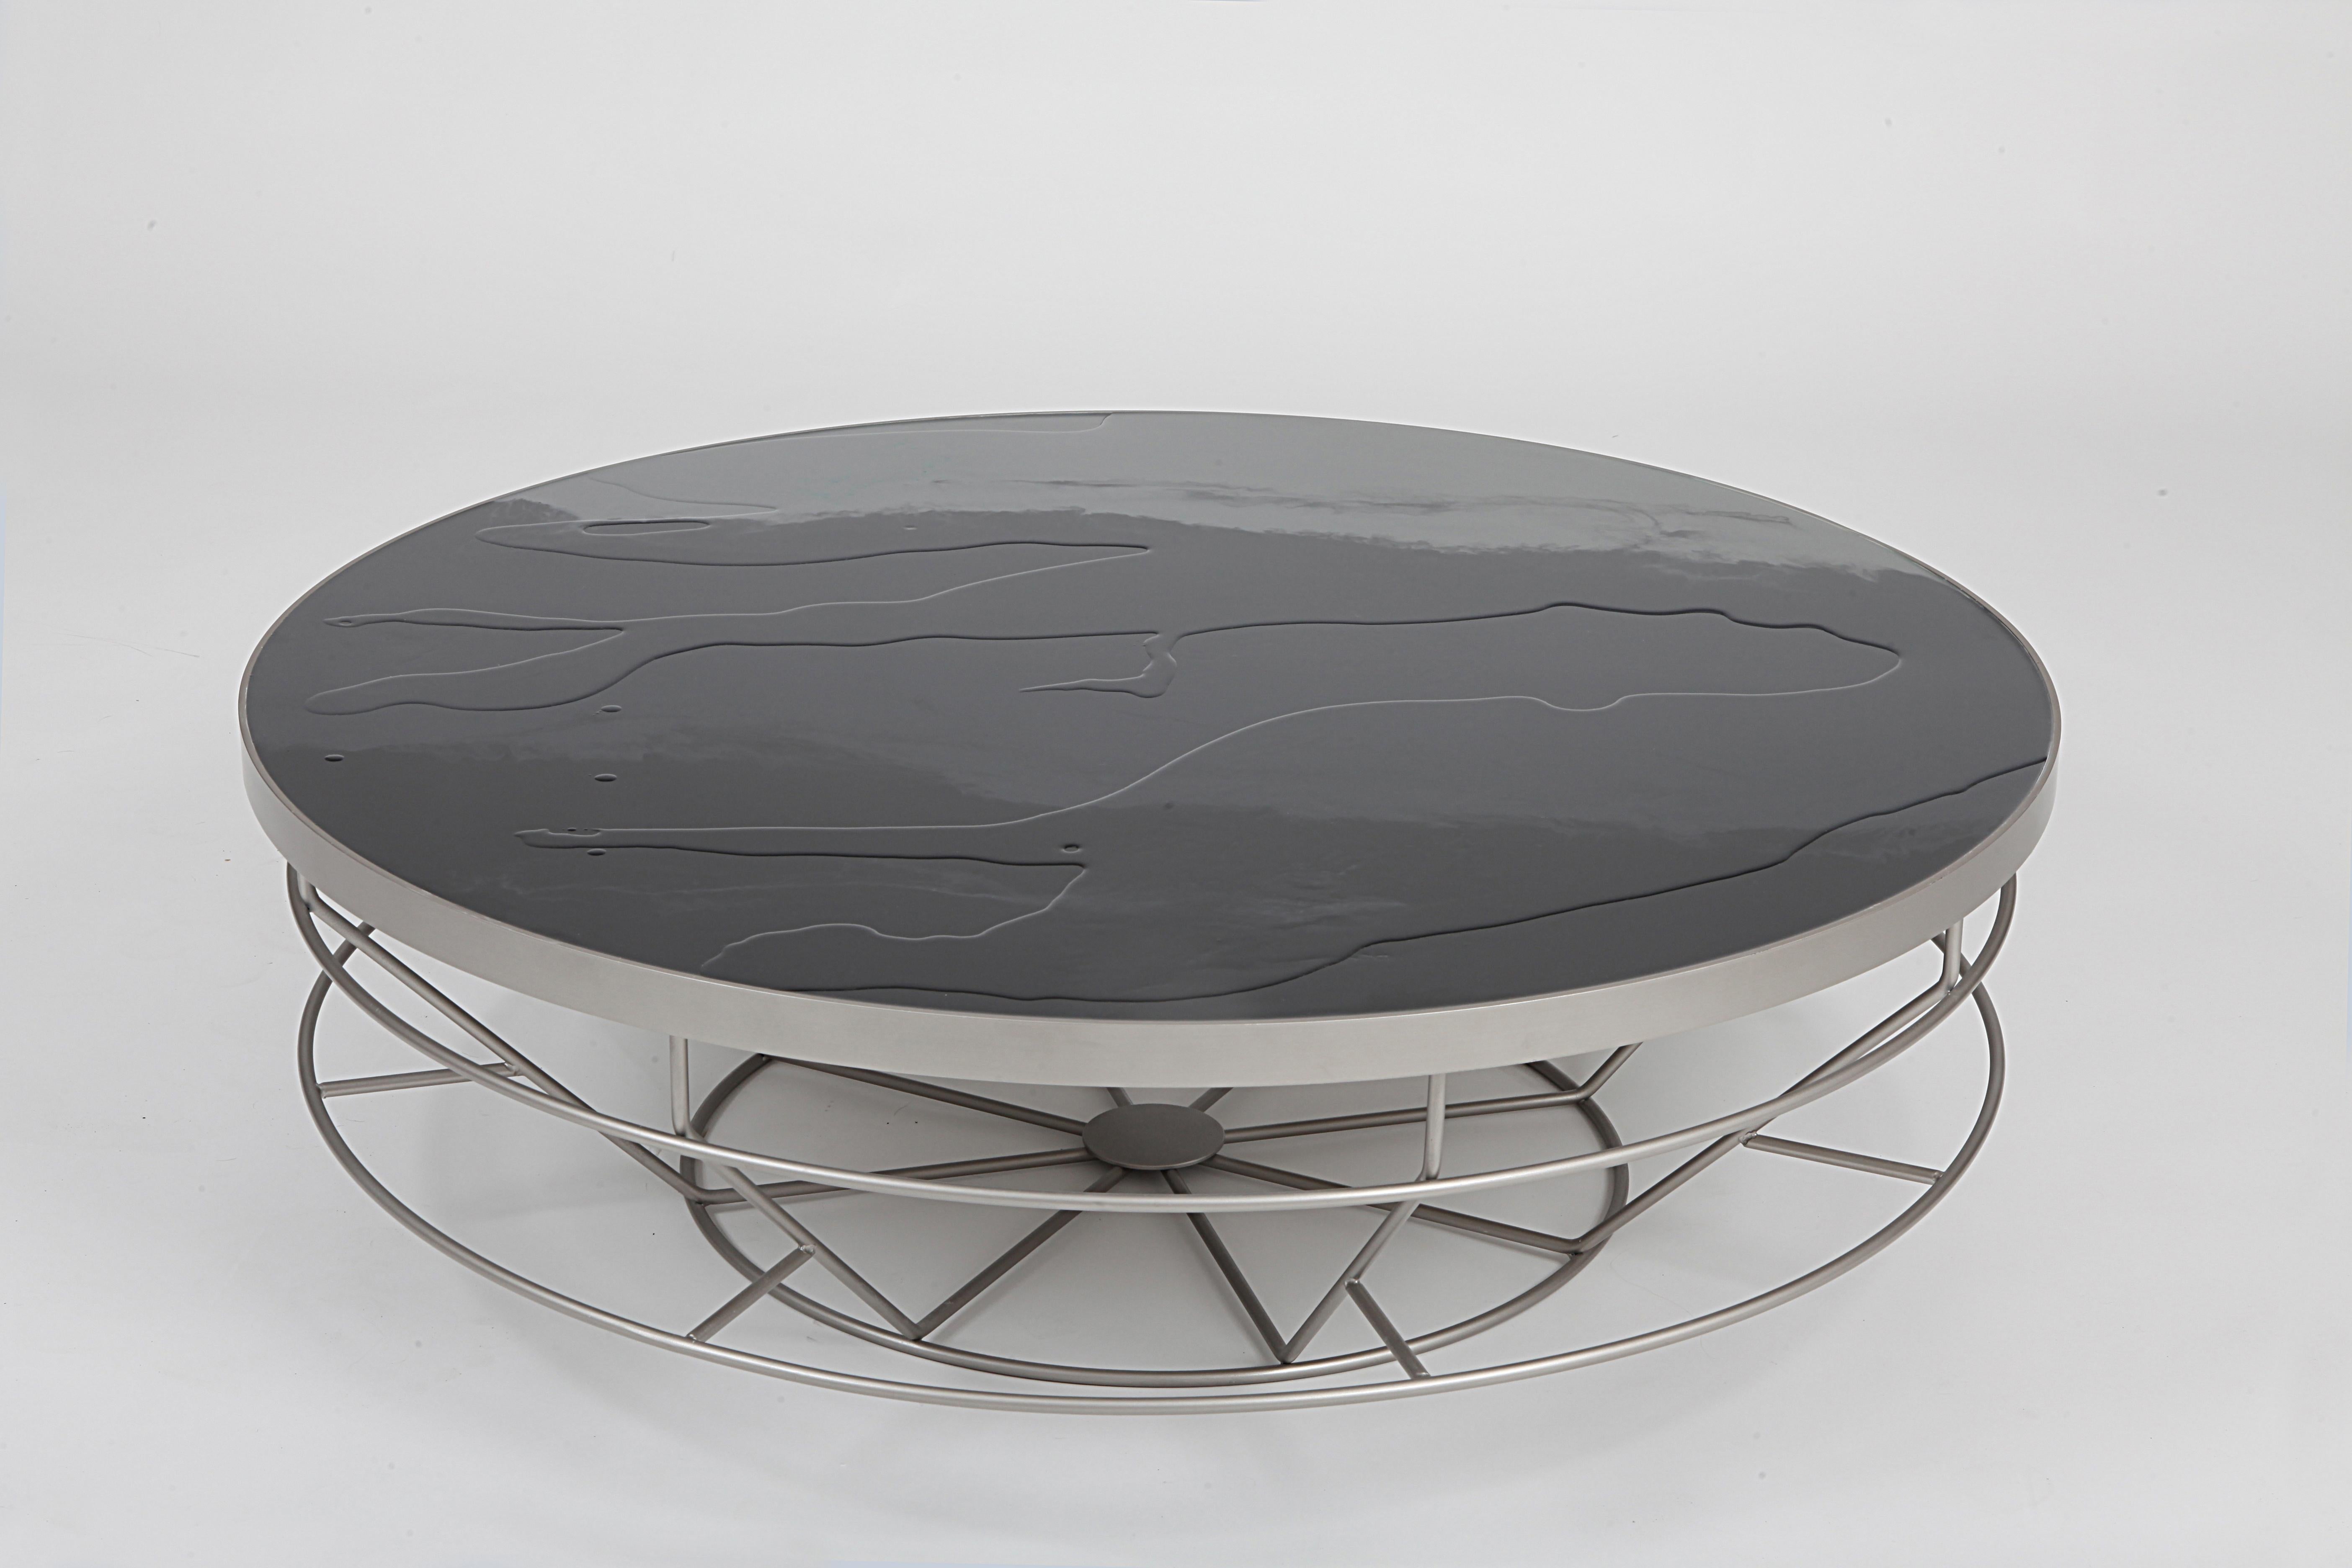 Olis Coffee Table by Dalmoto
Dimensions: Ø 95 x H 30 cm.
Materials: Nichel Marino nickel and resin.

Available in different metal and resin options. Available in two sizes. Please contact us. 

Silo and Olis are metal coffee tables with a resin top.